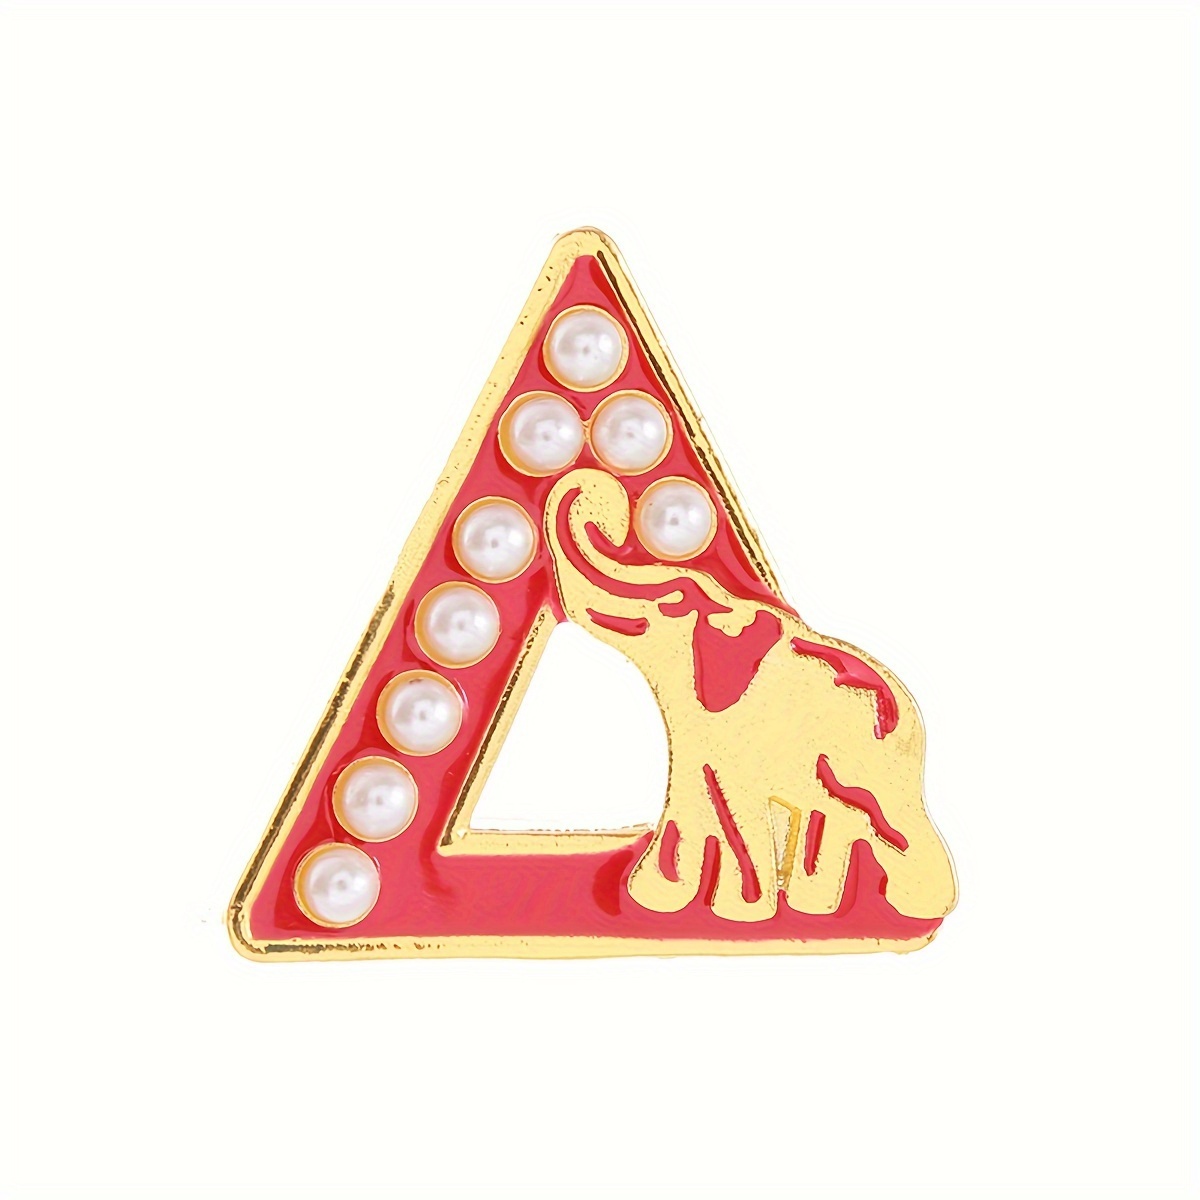 

Elegant Red Triangle Elephant Brooch With Faux Pearls - Alloy Lapel Pin For Women, Perfect For Parties & Gifts